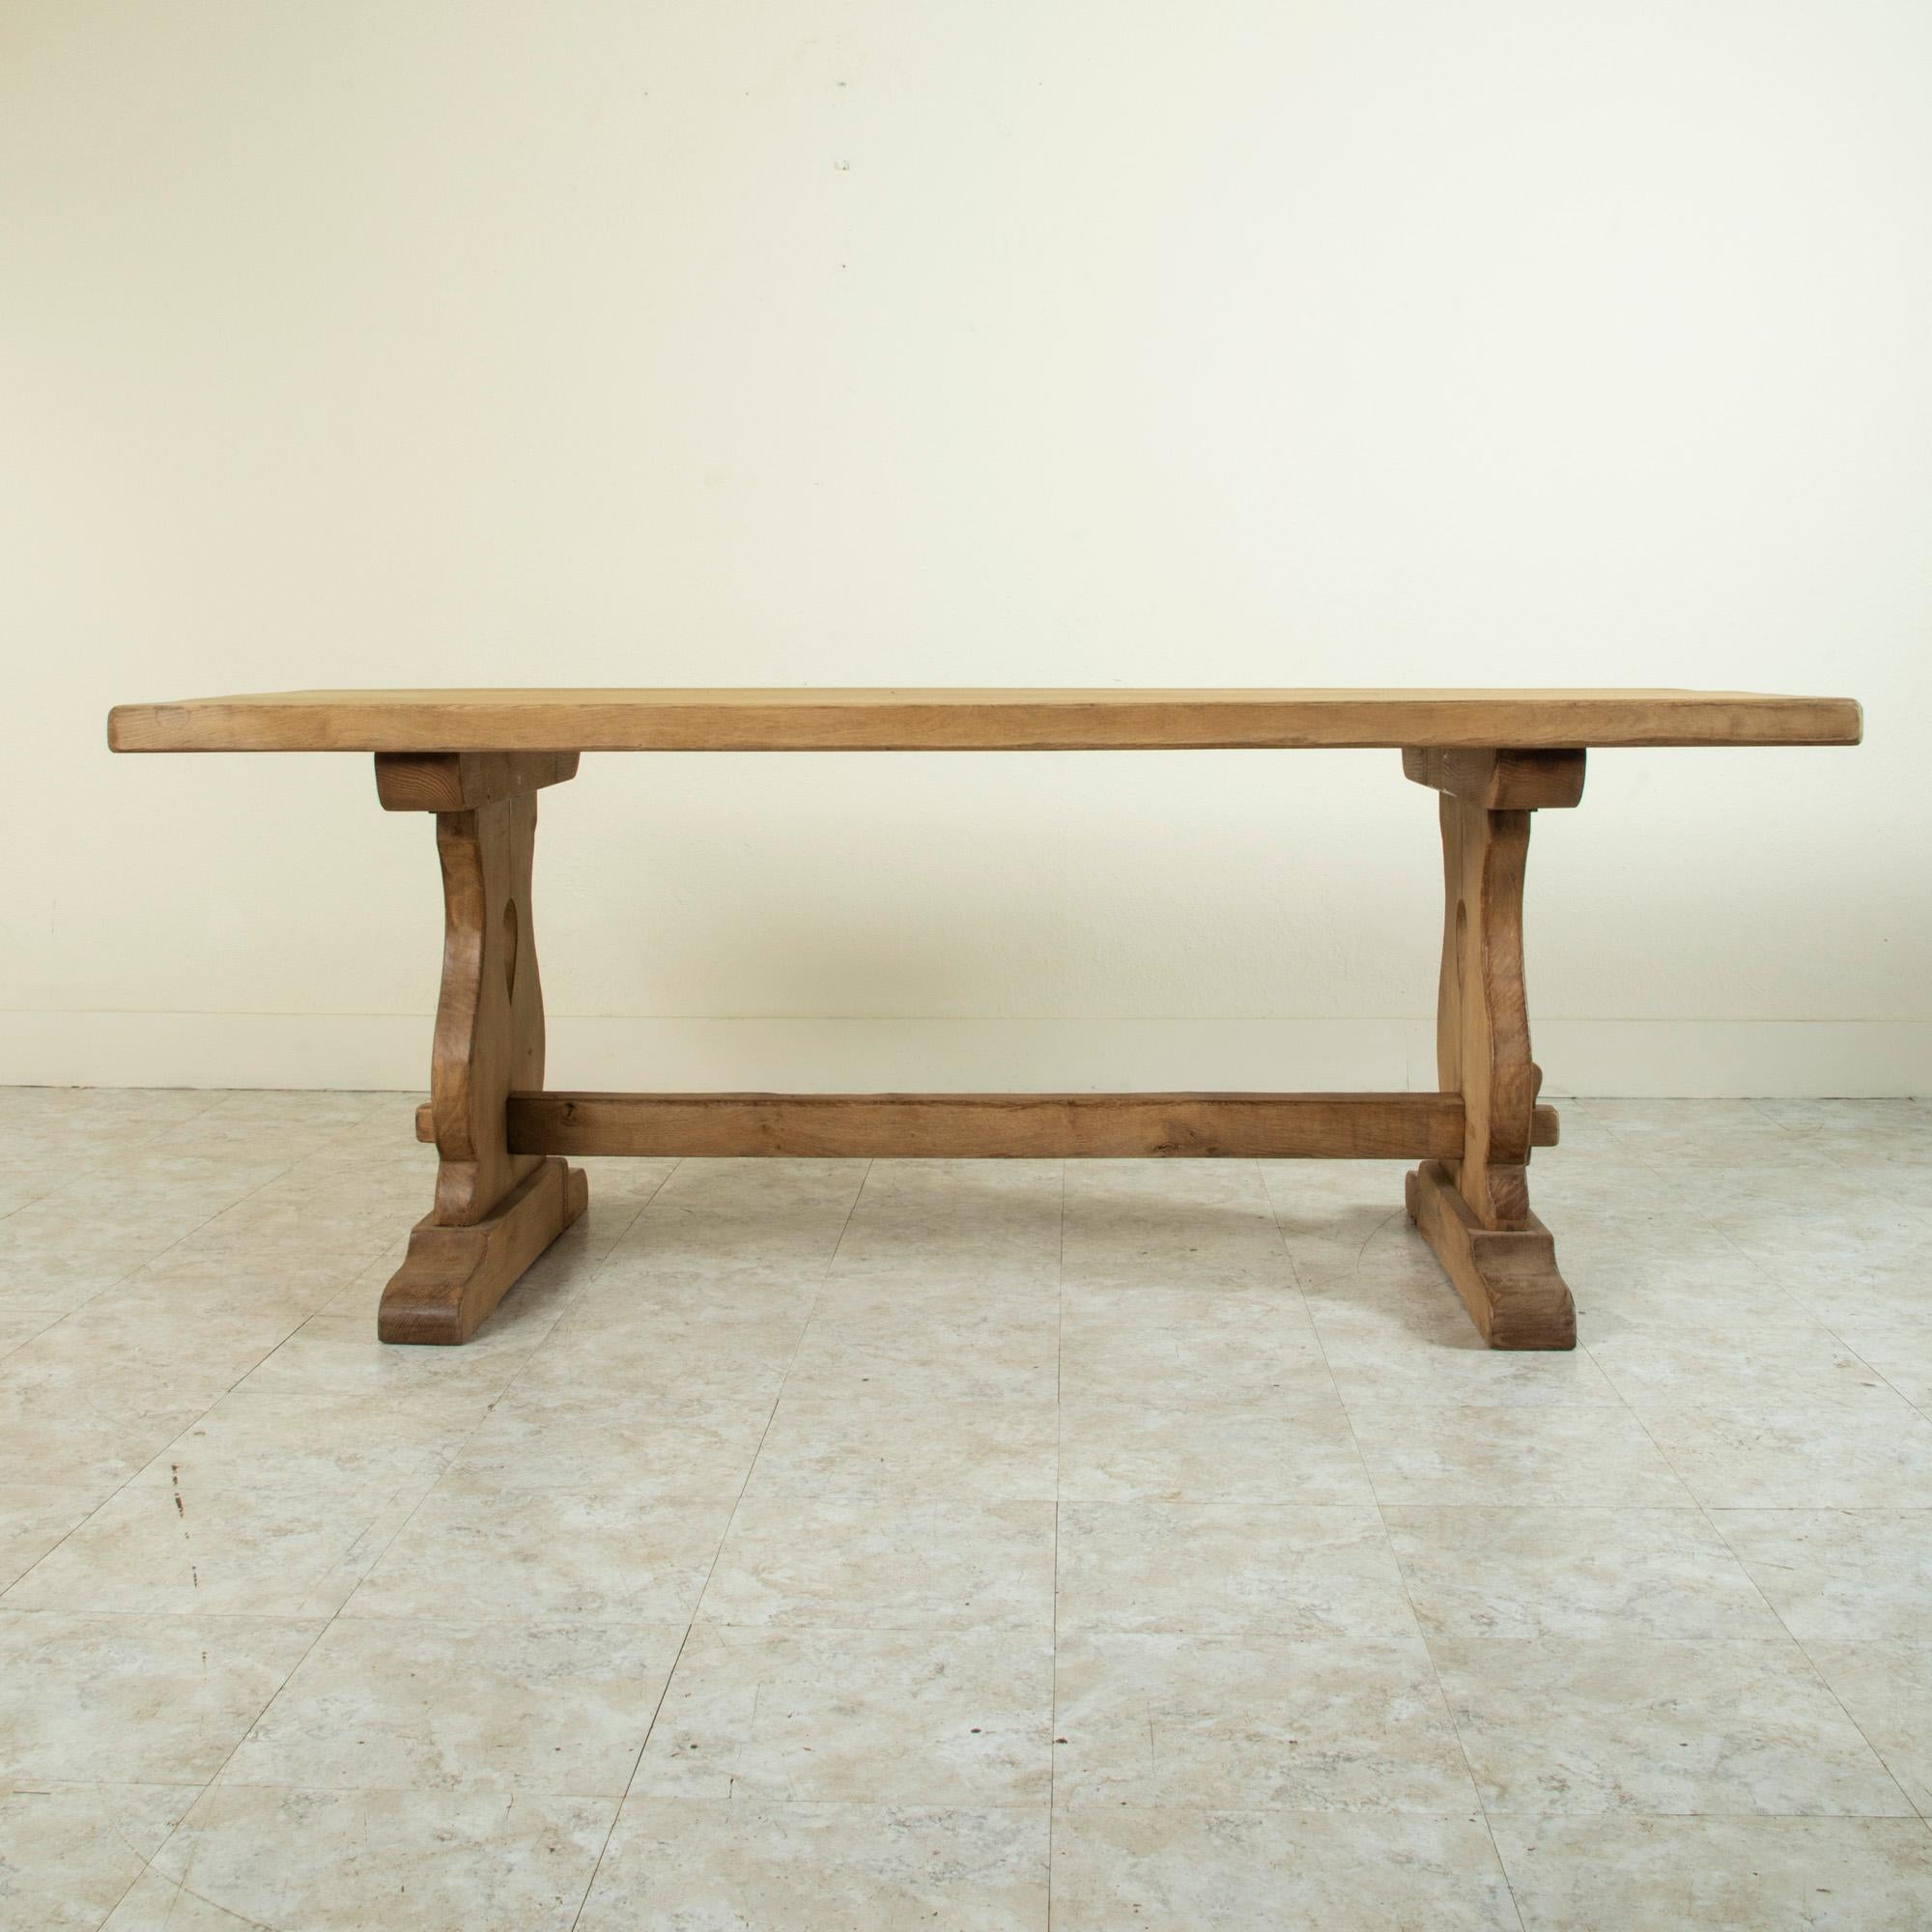 From the region of Normandy, France, this artisan-made oak monastery table or dining table from the turn of the twentieth century features a two-inch thick top constructed of seven planks of wood. Resting on a sturdy trestle base constructed using